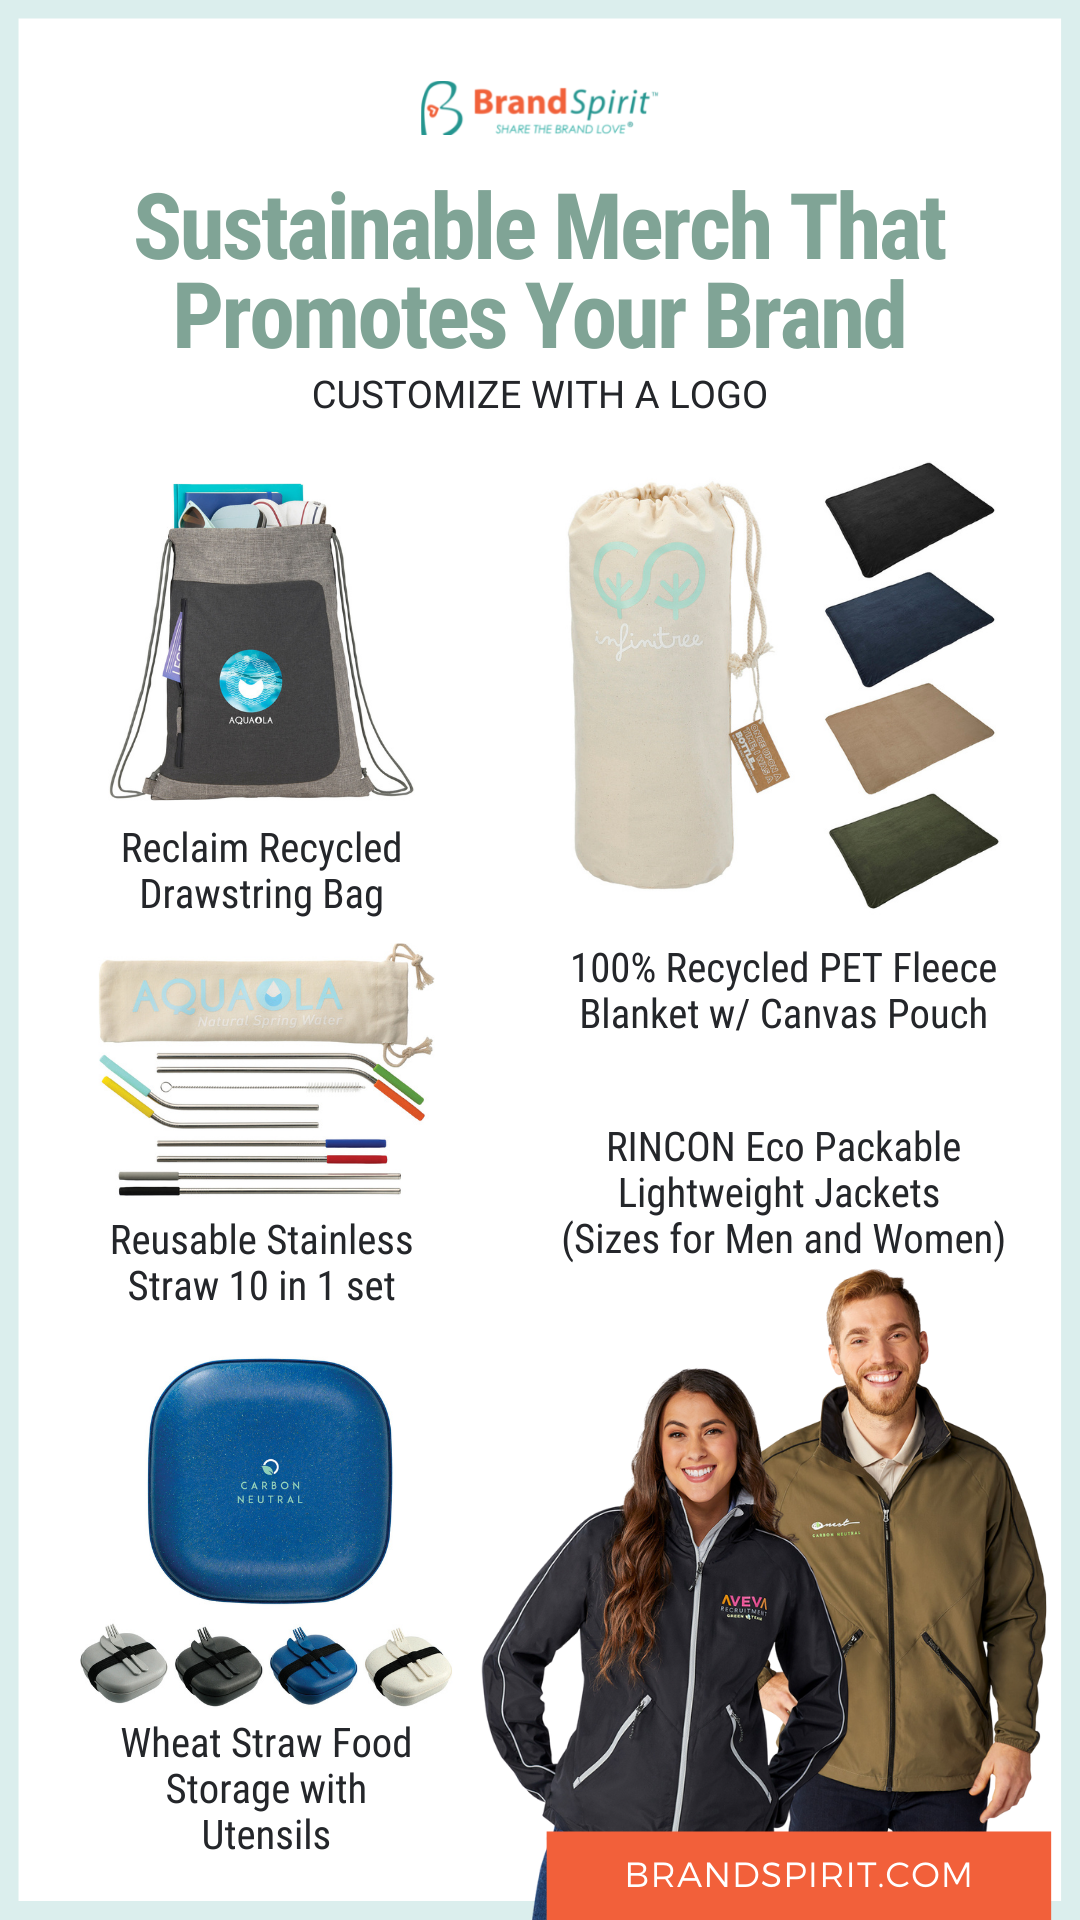 Sustainable Merch that Promote Your Brand: Add your logo to customize. Available at Brand Spirit, including drop shipping option.